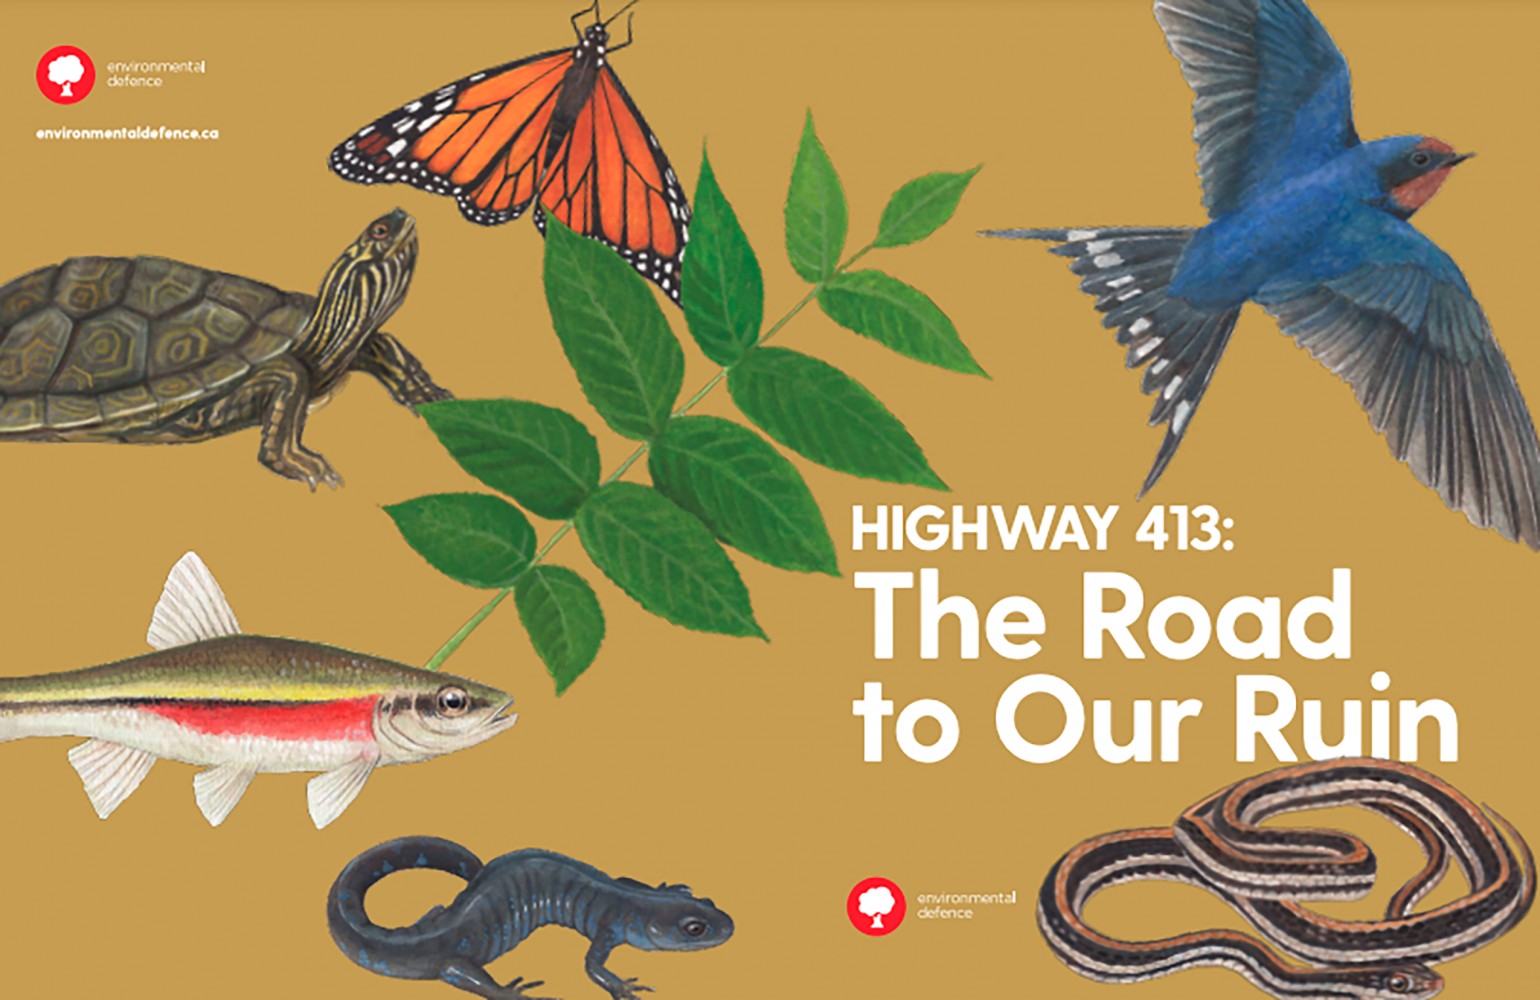 New report exposes dire threat Hwy 413 poses to endangered species: PCs have ignored the risks; will Ottawa listen?